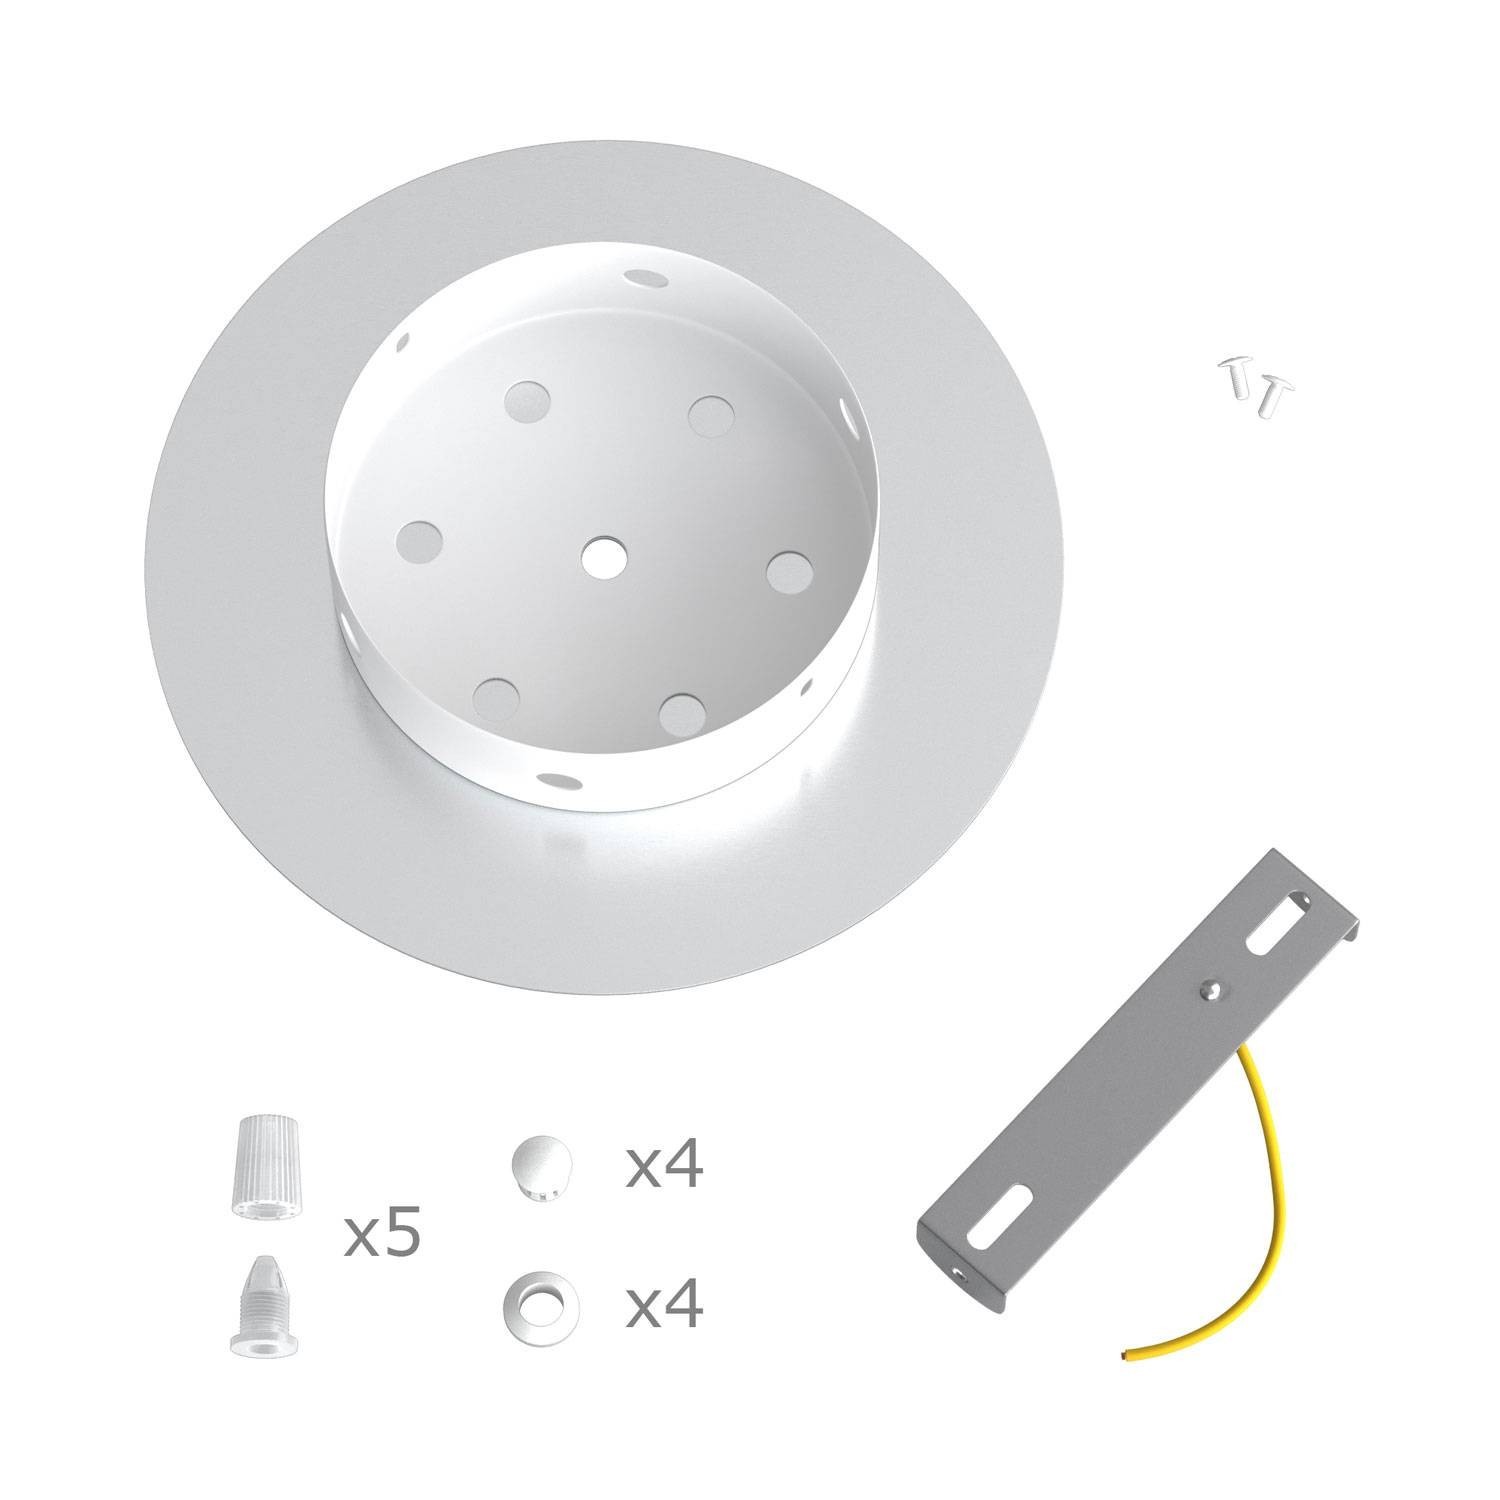 Round Rose-One 5-hole and 4 side holes ceiling rose Kit, 200 mm